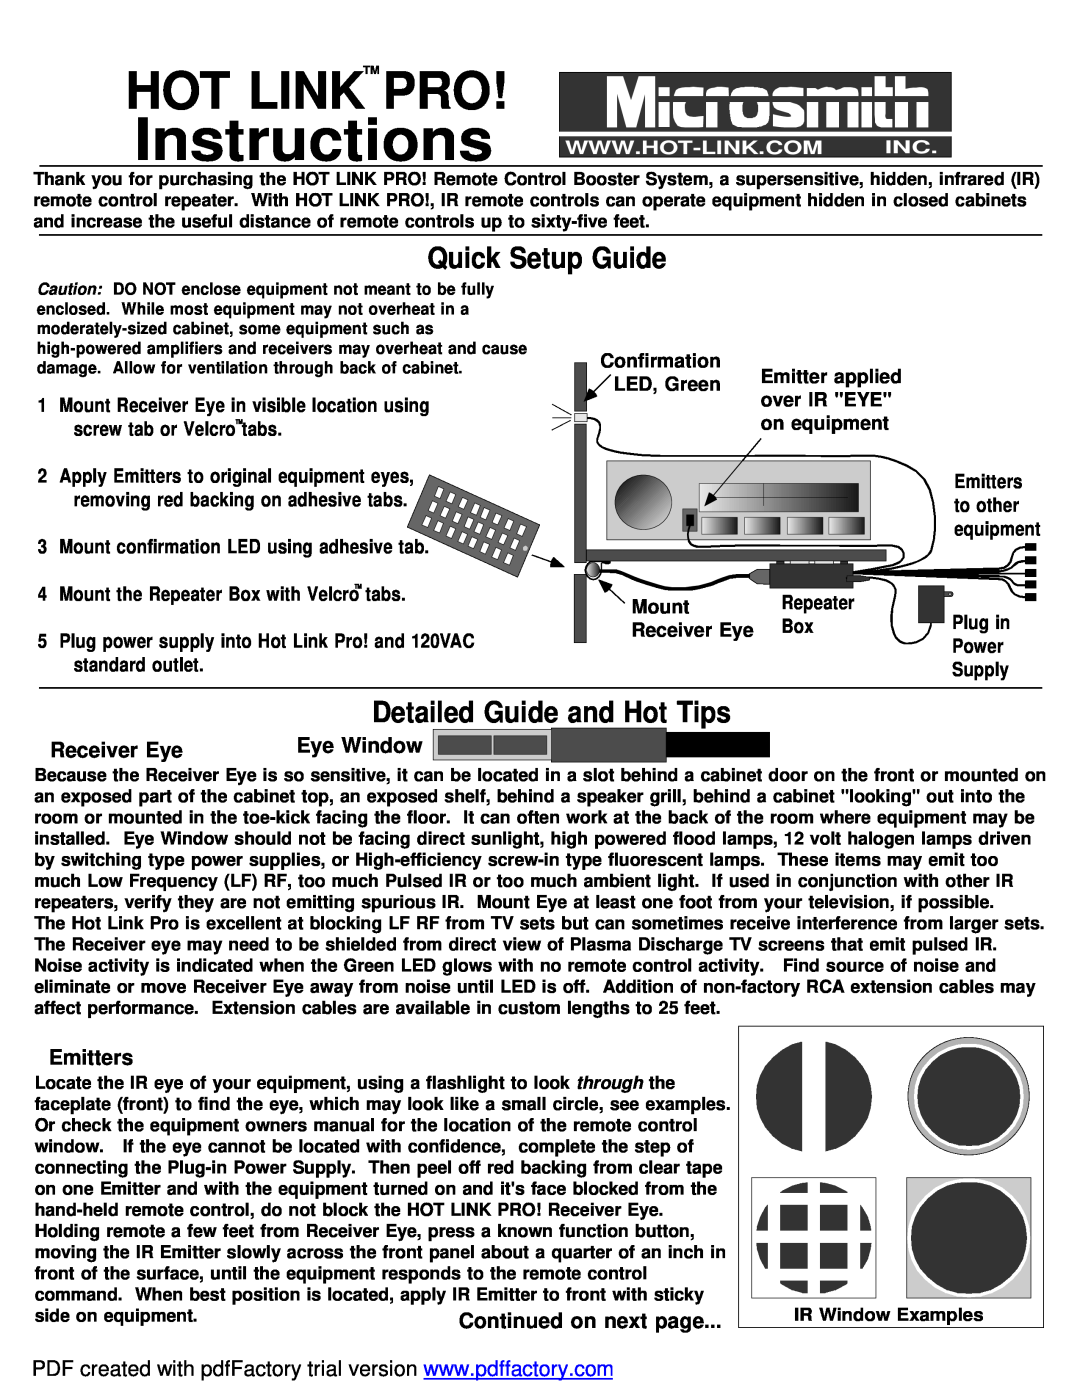 Microsmith EXPX6 setup guide Receiver Eye, Eye Window, Emitters, Continued on next page, Instructions, Hot Linktm Pro 